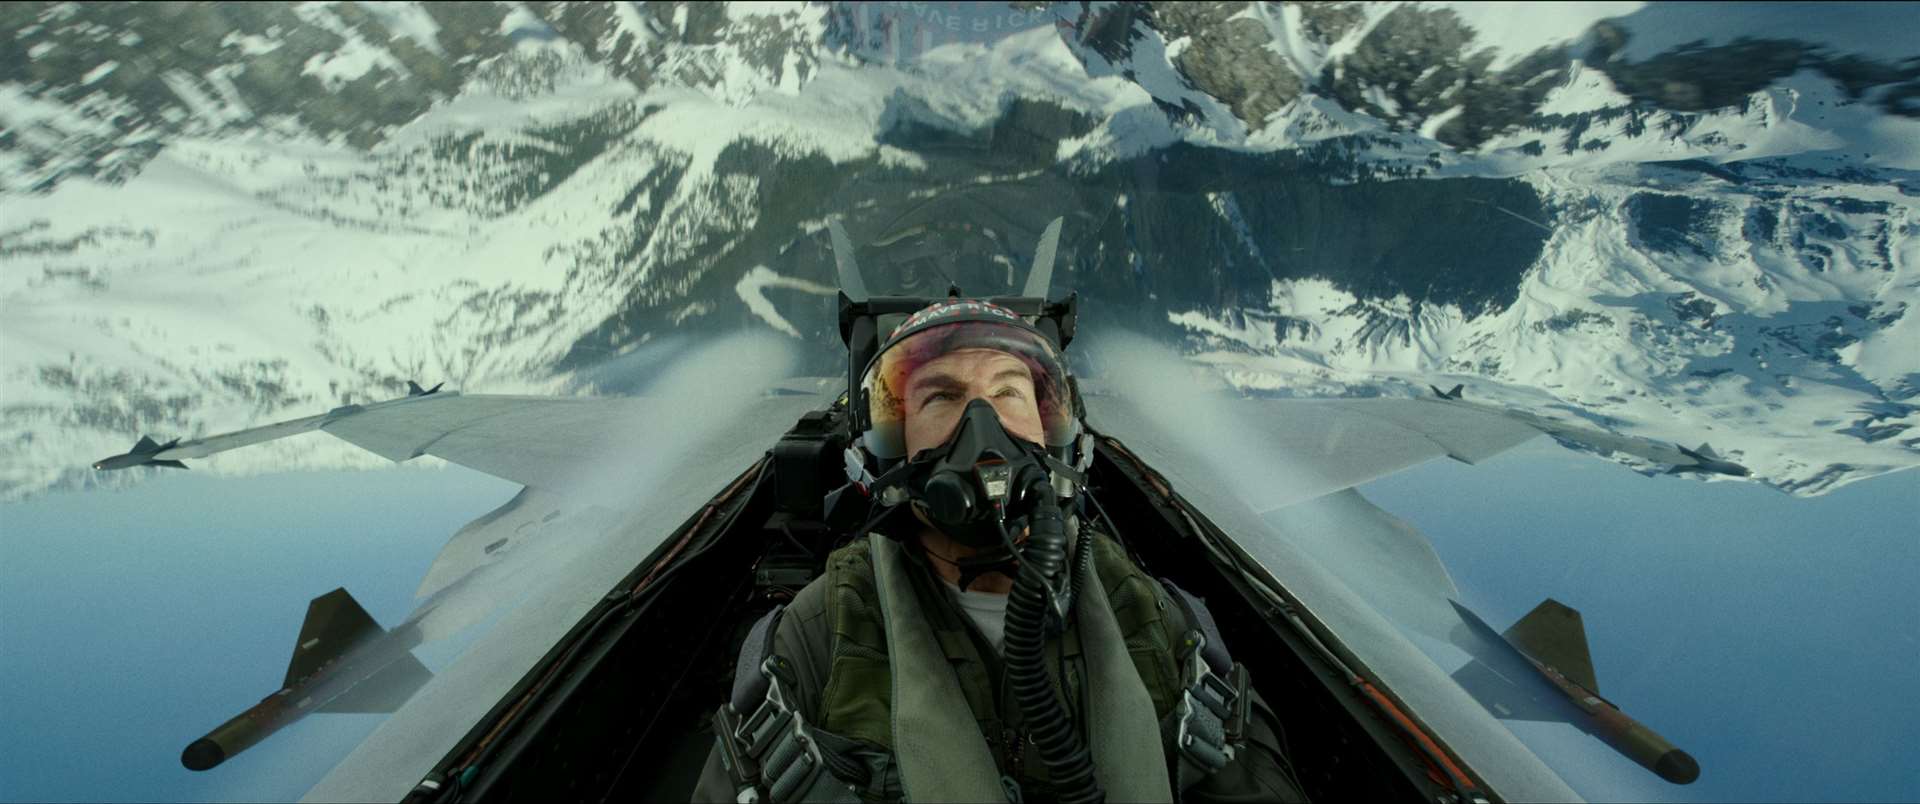 Tom Cruise as Captain Pete "Maverick" Mitchell in the air. Picture: PA Photo/Paramount Pictures